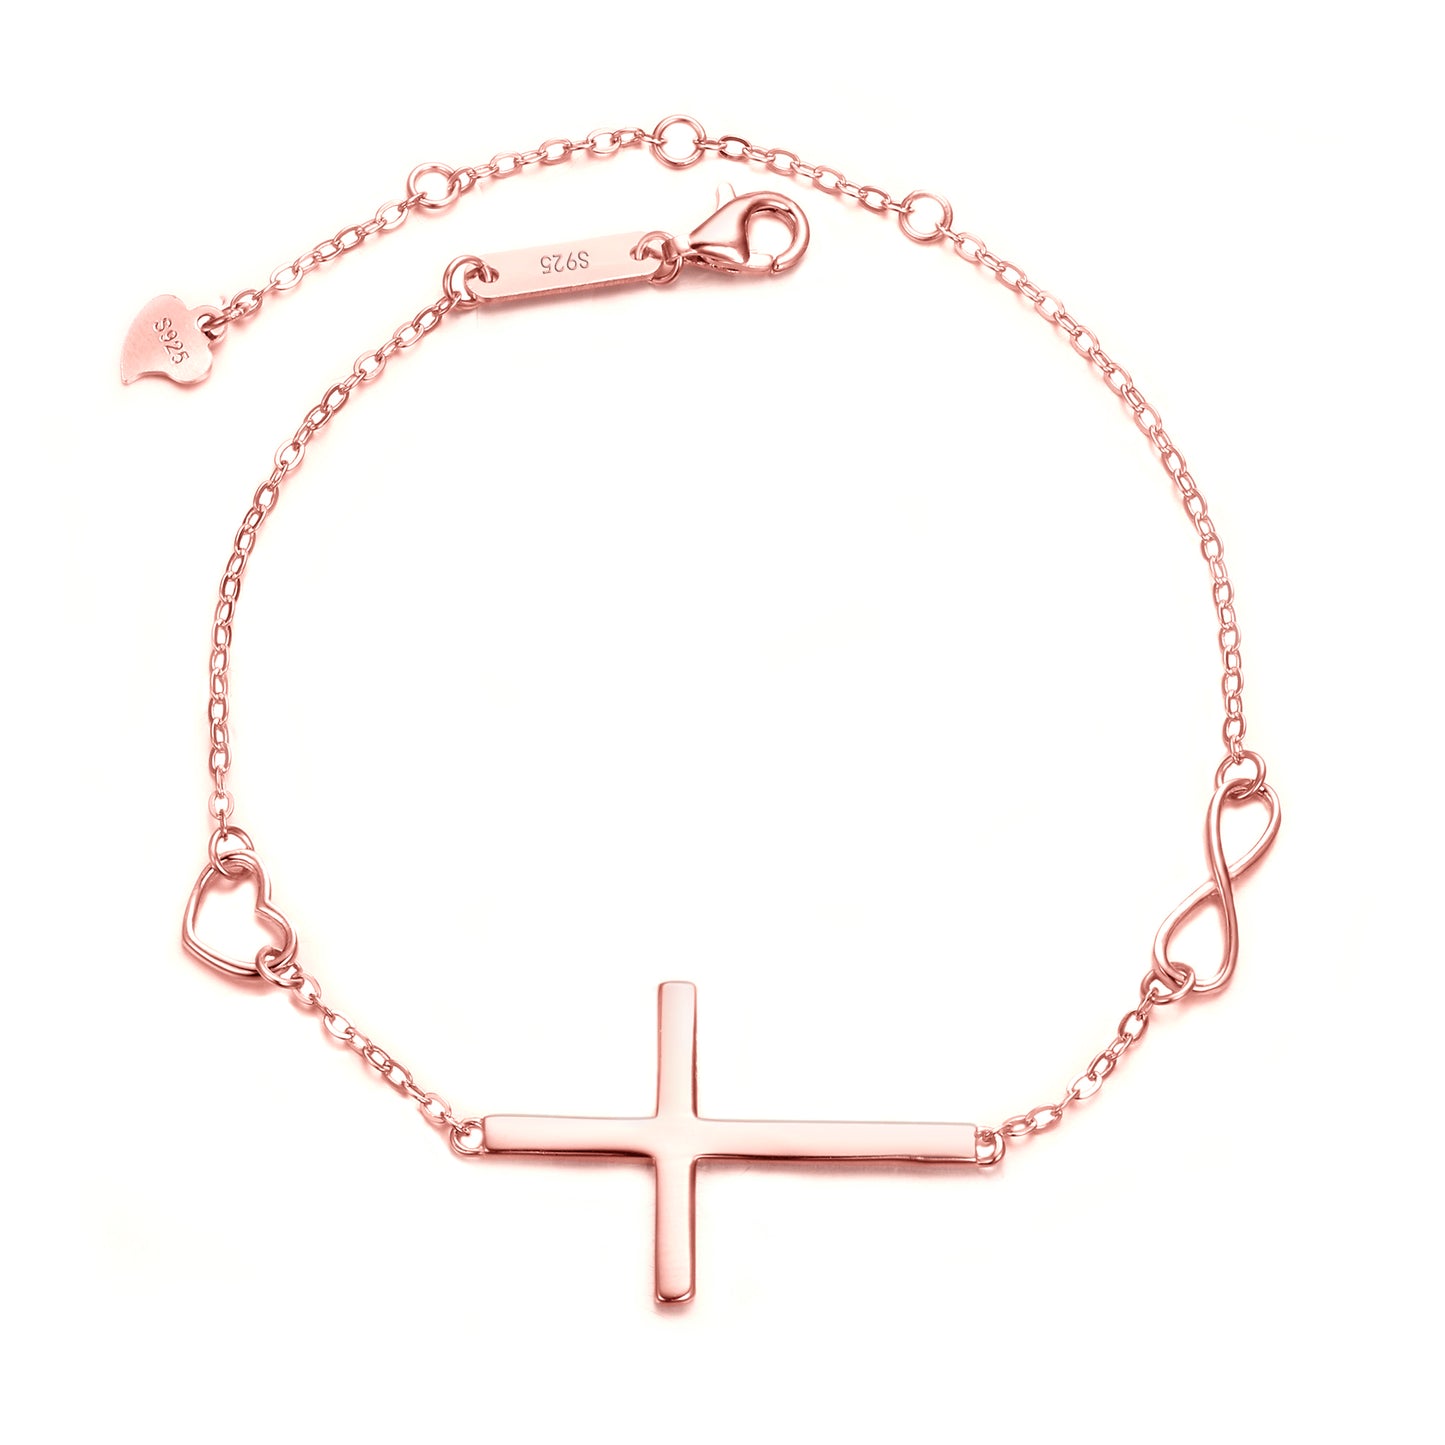 10885 925 Sterling Silver Religious Classic Heart Infinity Charm Cross Bracelets